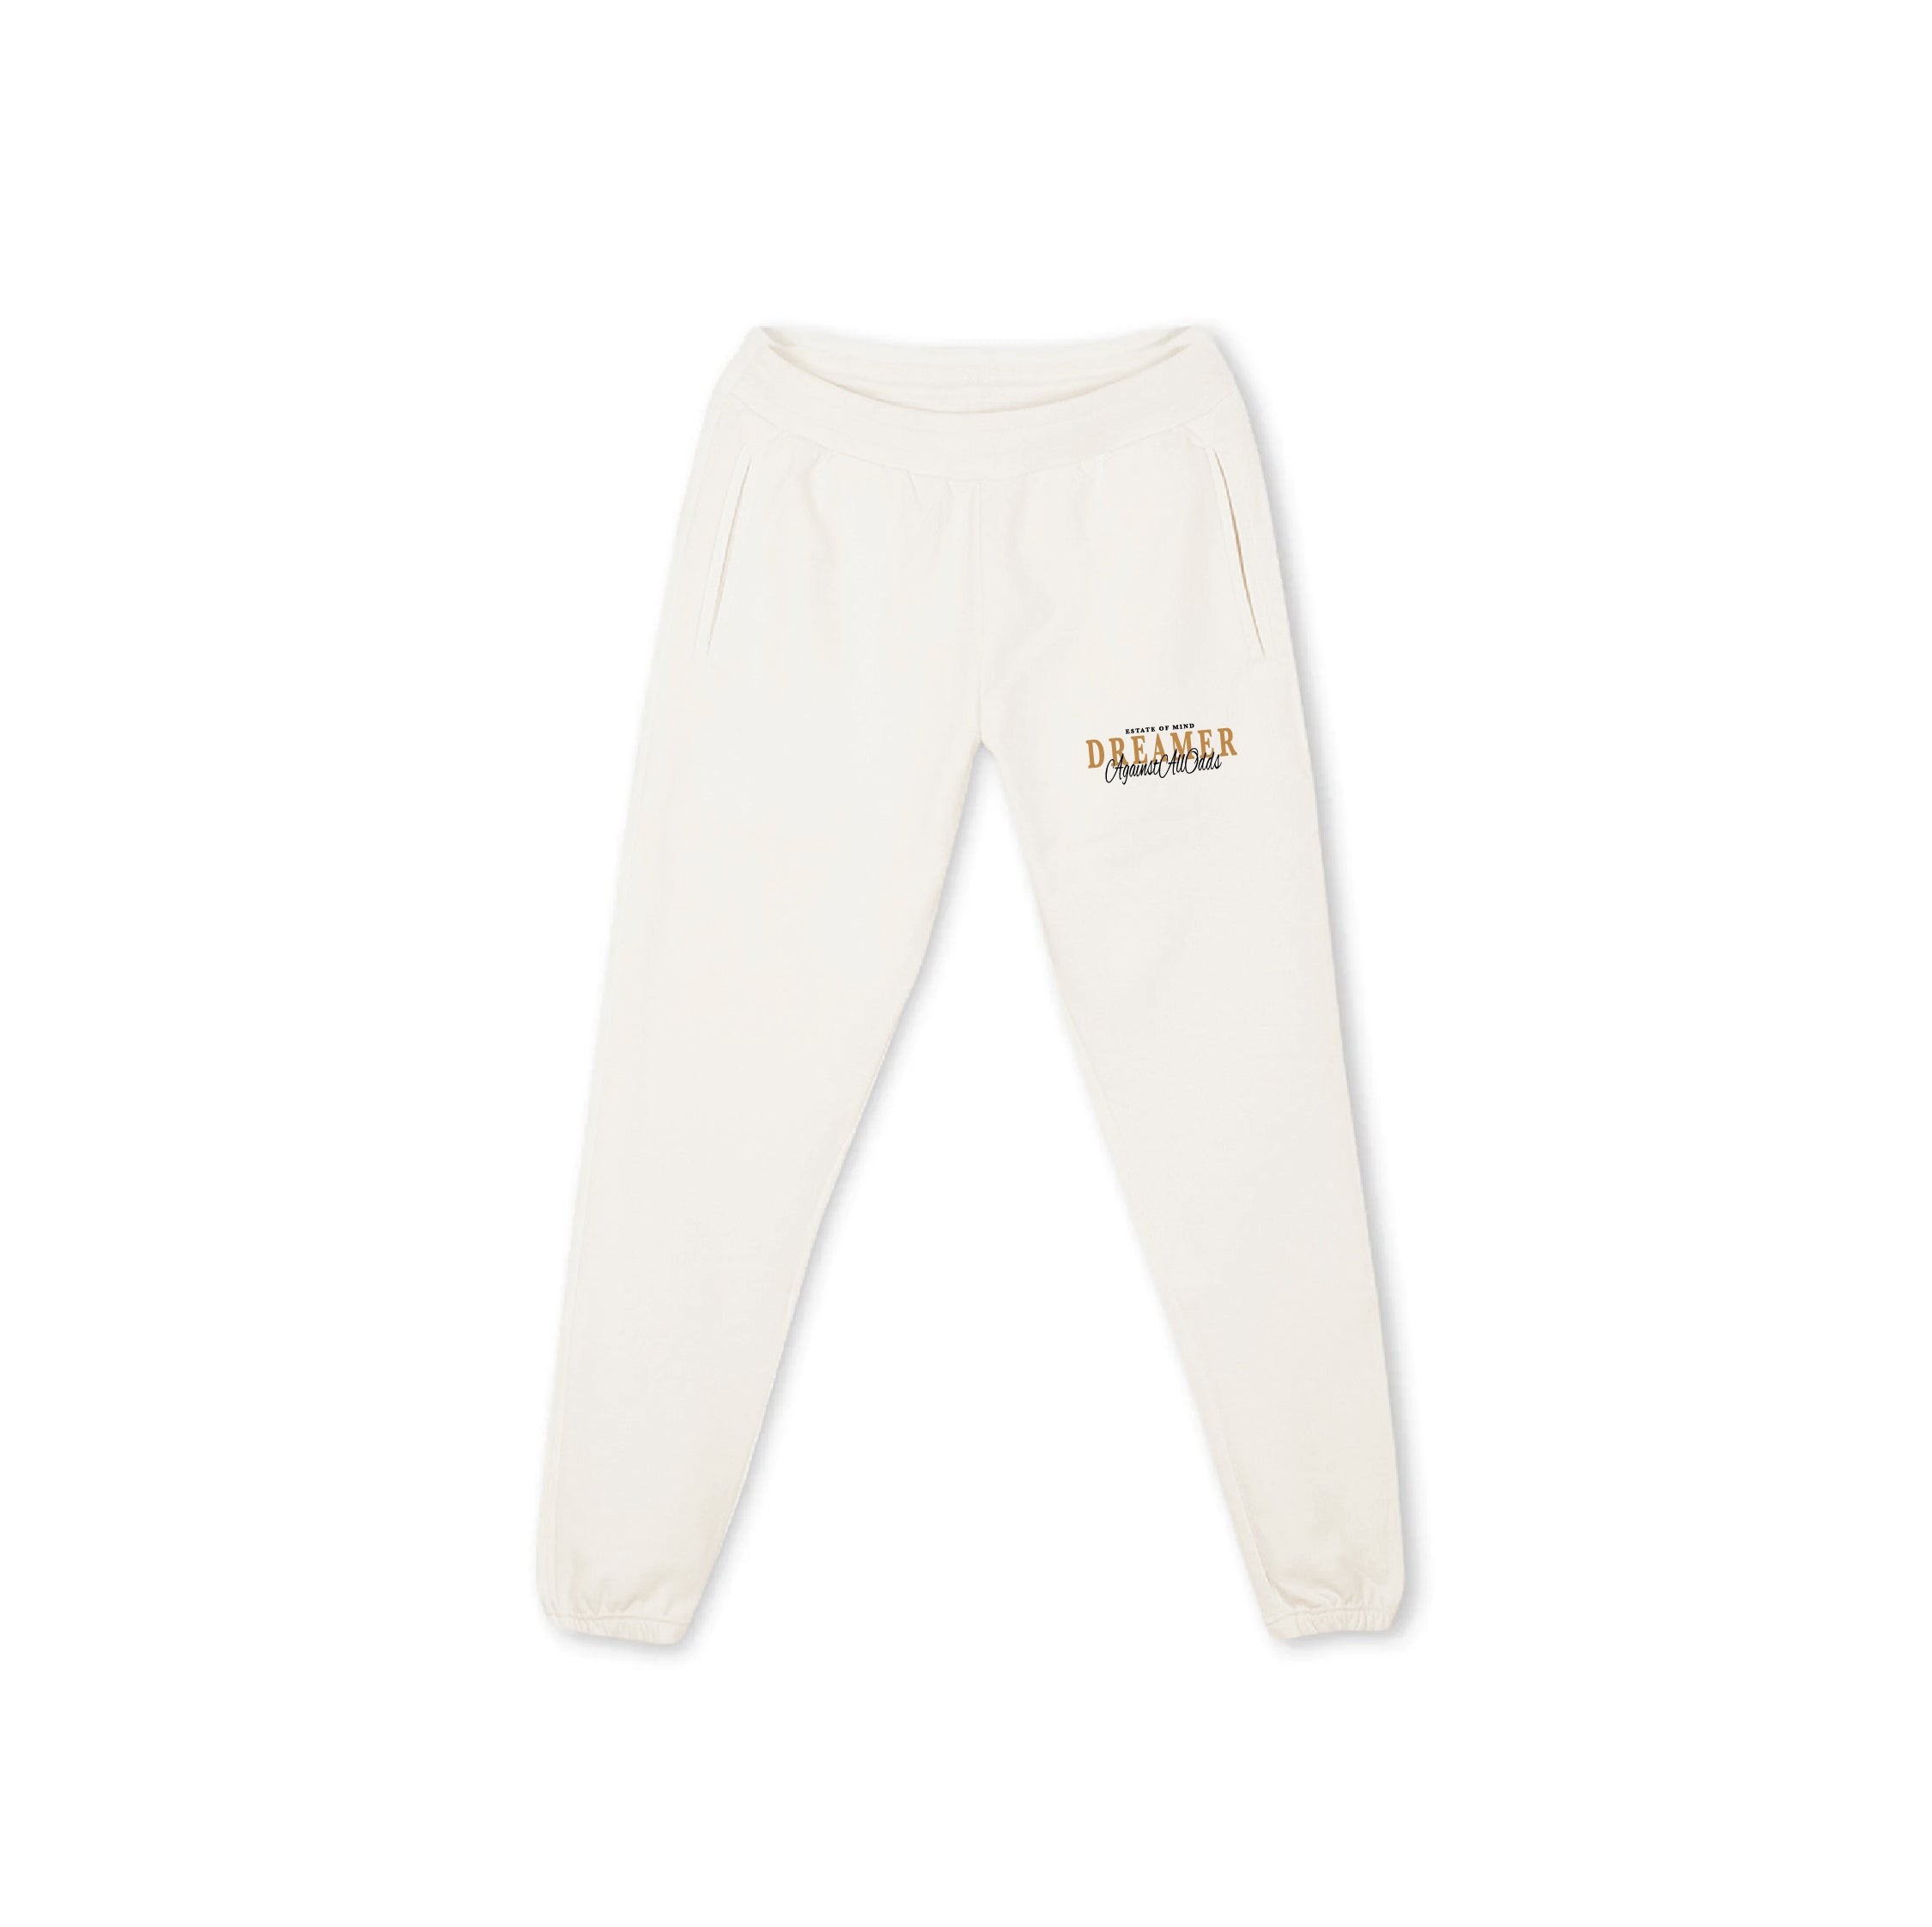 ESTATE OF MIND FRENCH TERRY SWEATPANTS - VINTAGE WHITE